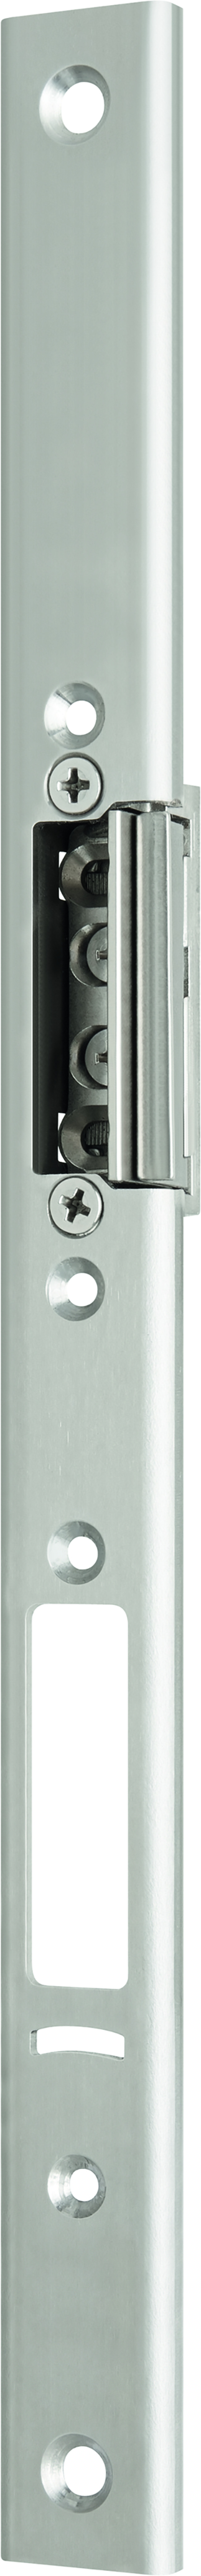 U-shaped face plate for the panic passive leaf locking system in metal frame doors 14413-M-STU